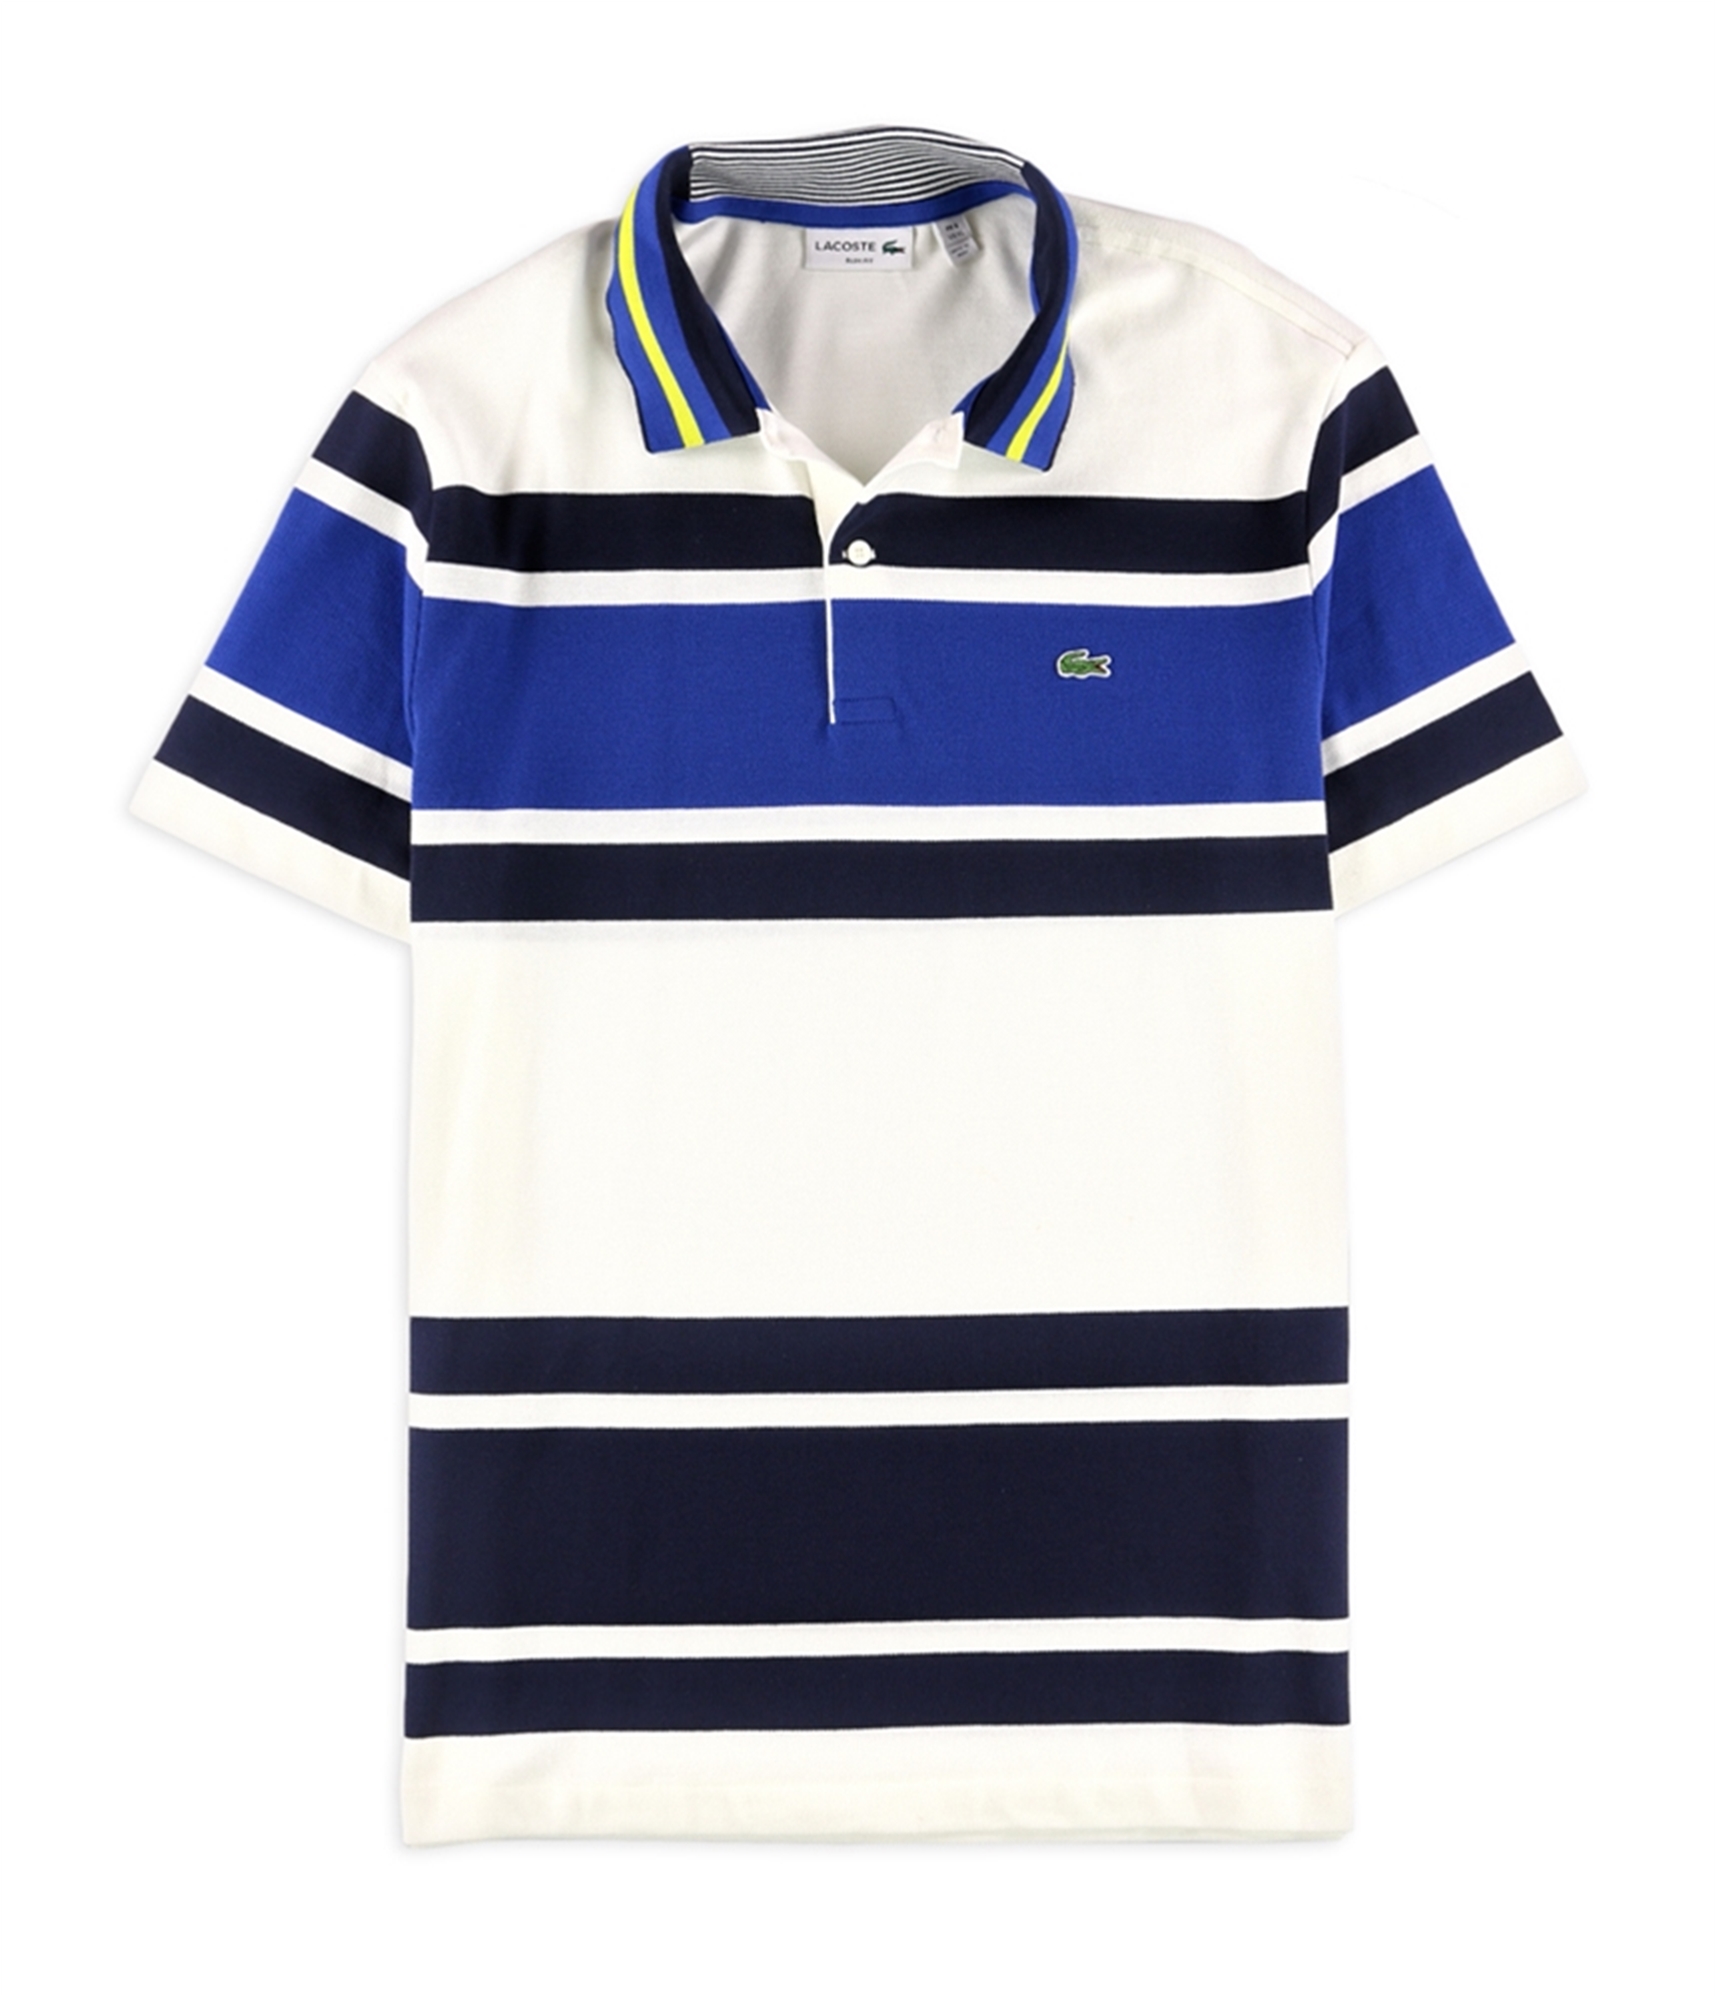 Buy a Mens Lacoste Slim Fit Striped Pique Rugby Polo Shirt Online ...